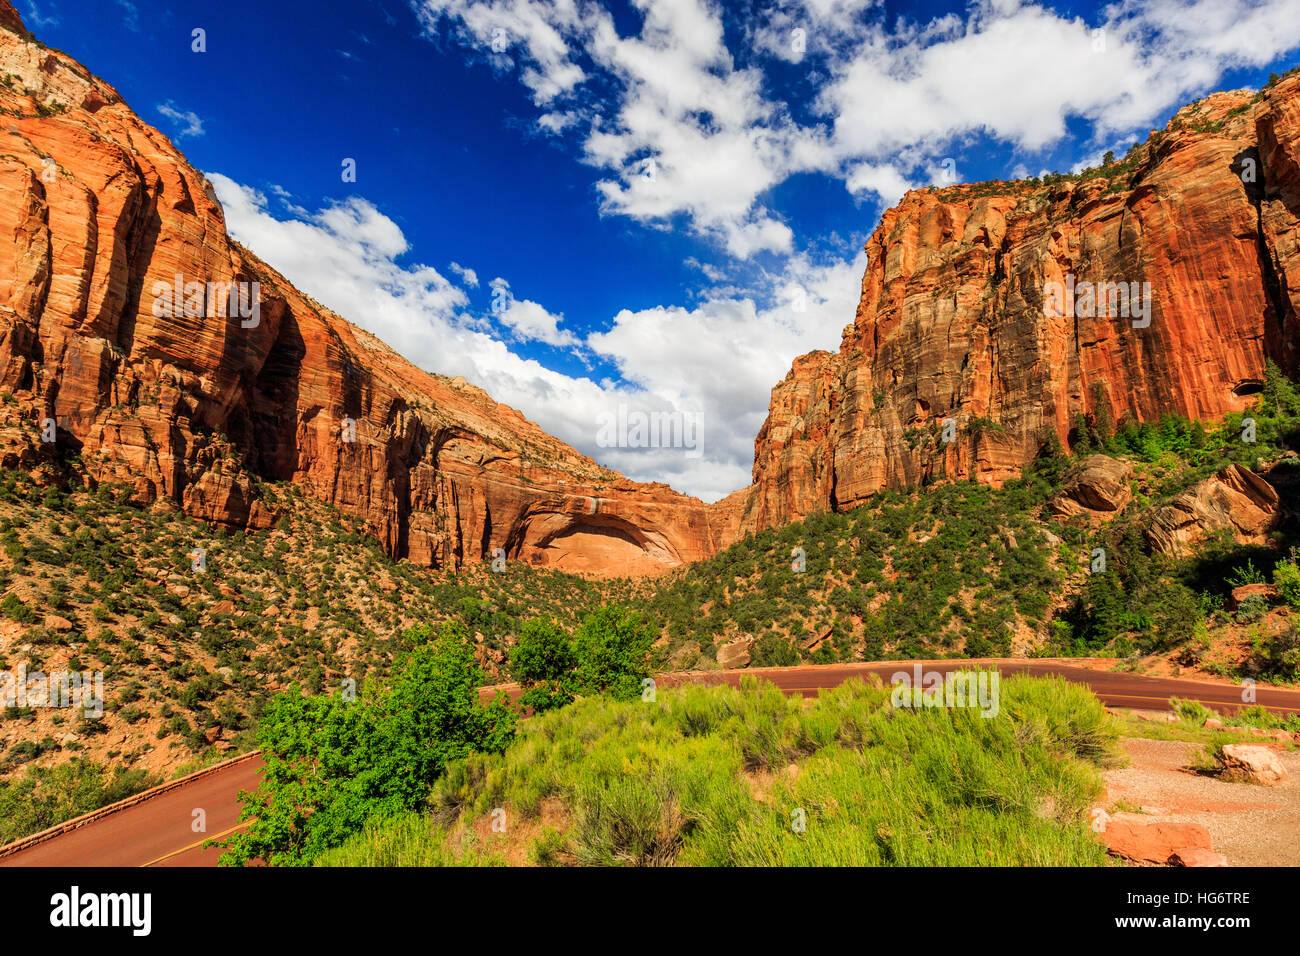 Natural Rock Arch in Zion National Park, near scenic road. Stock Photo